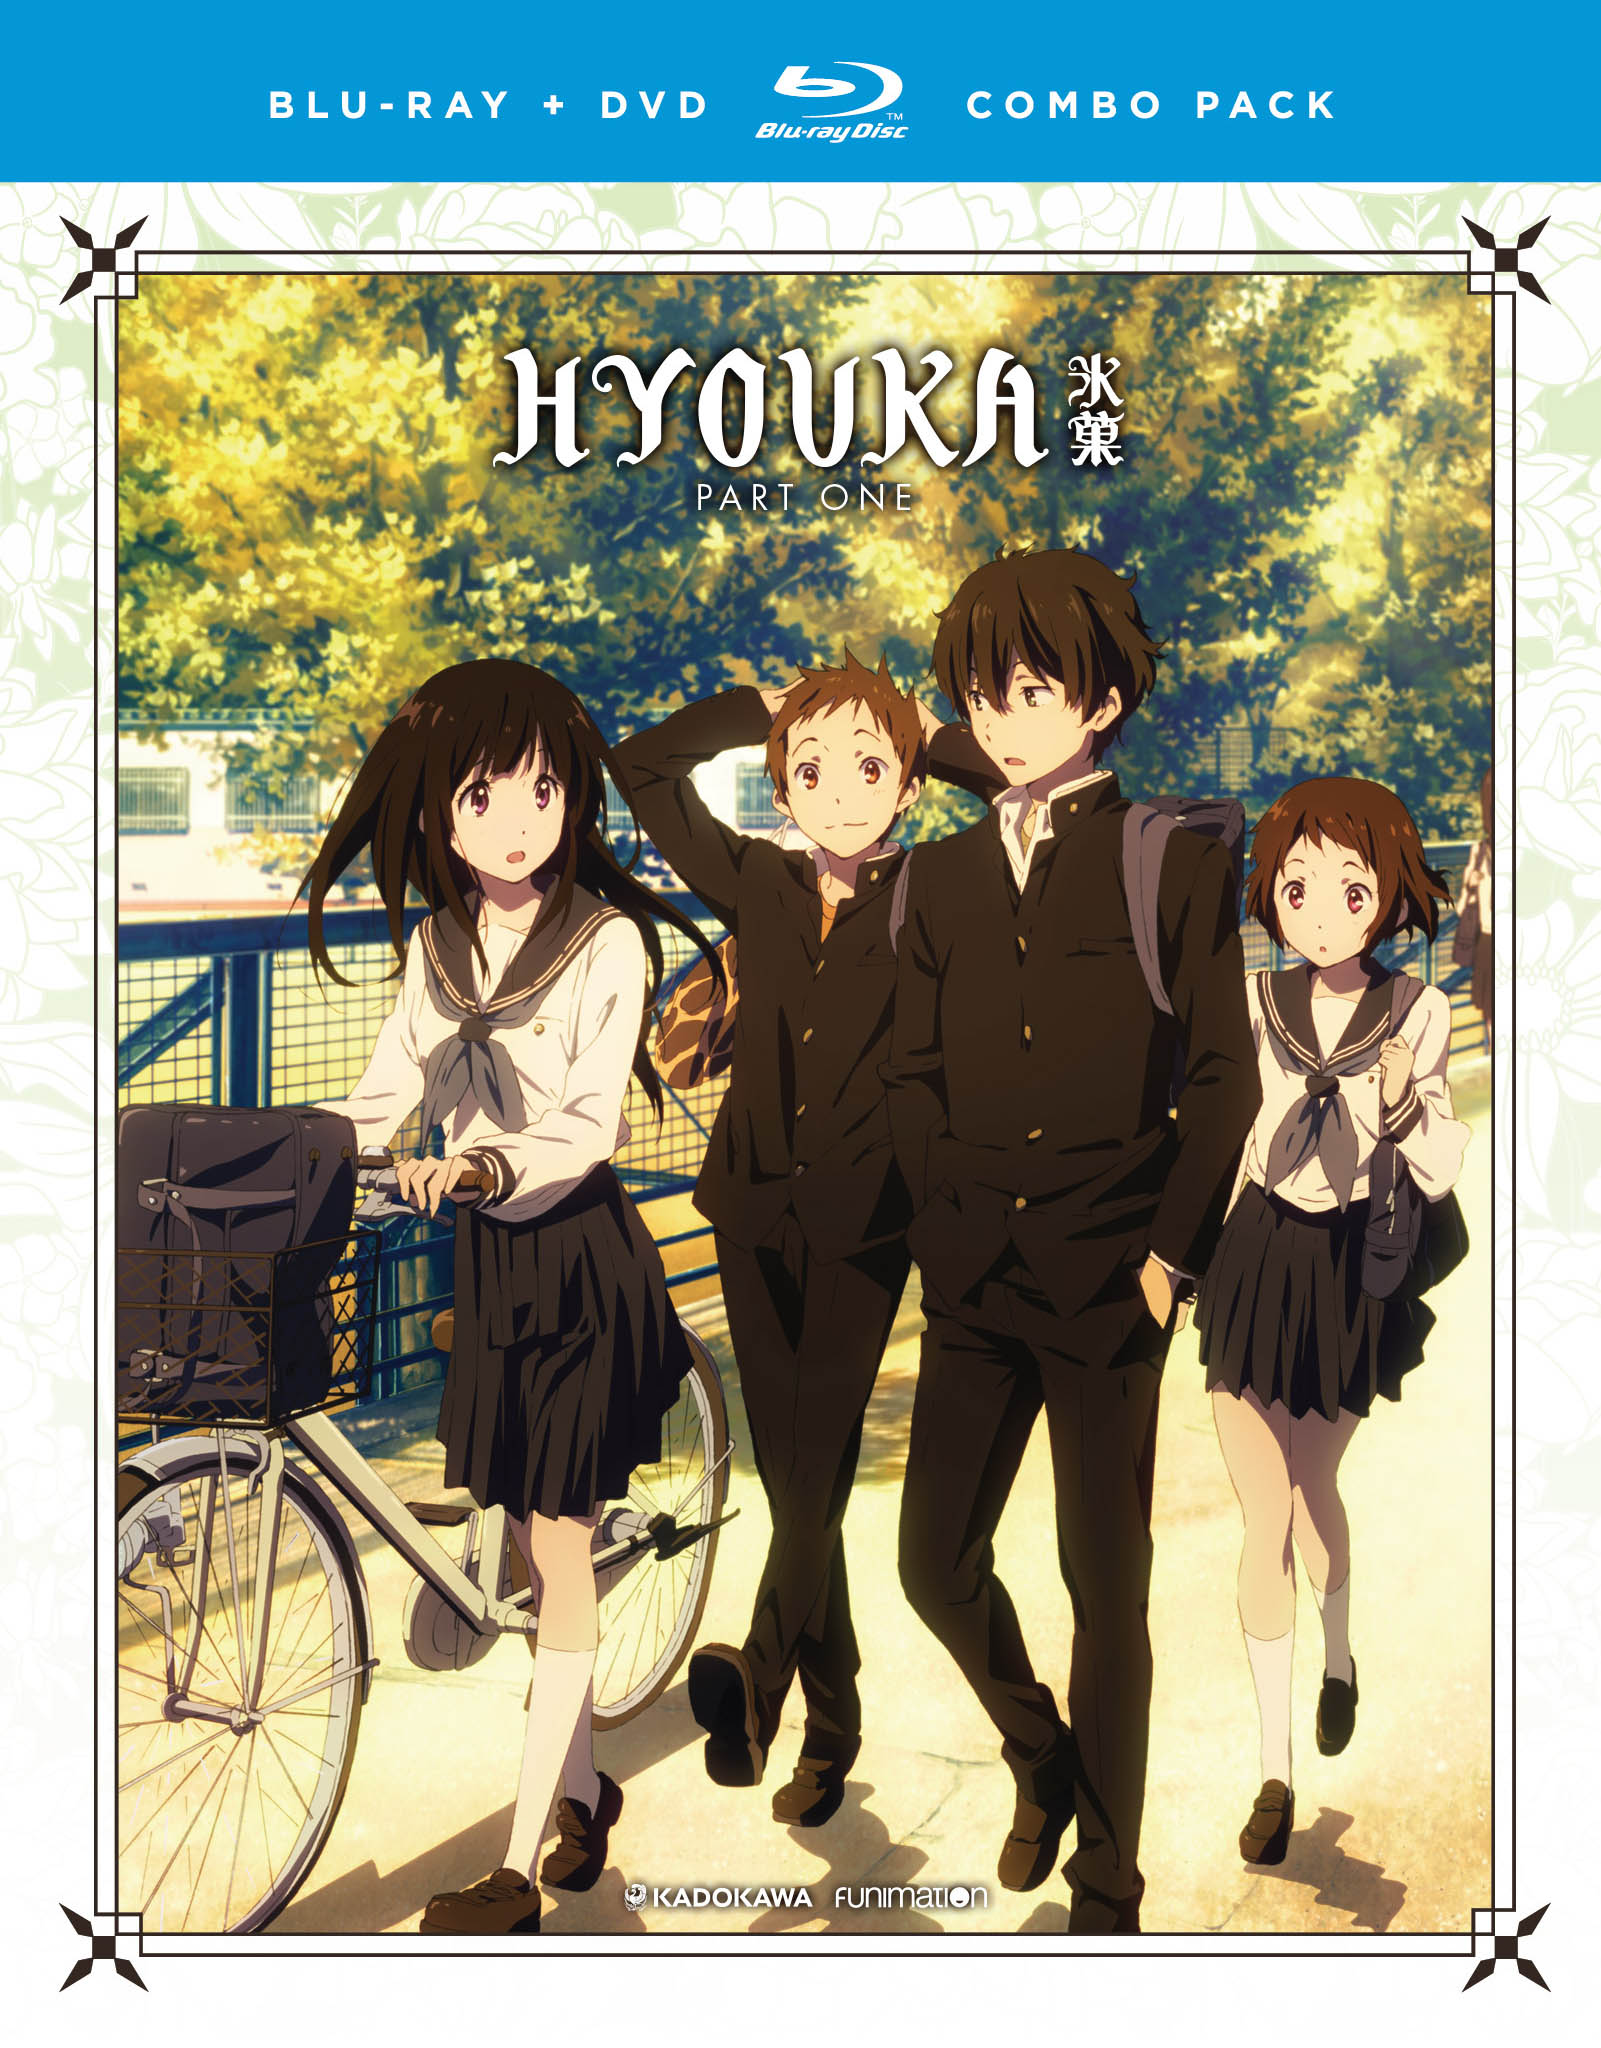 Hyouka - The Complete Series - Blu-ray + DVD image count 0